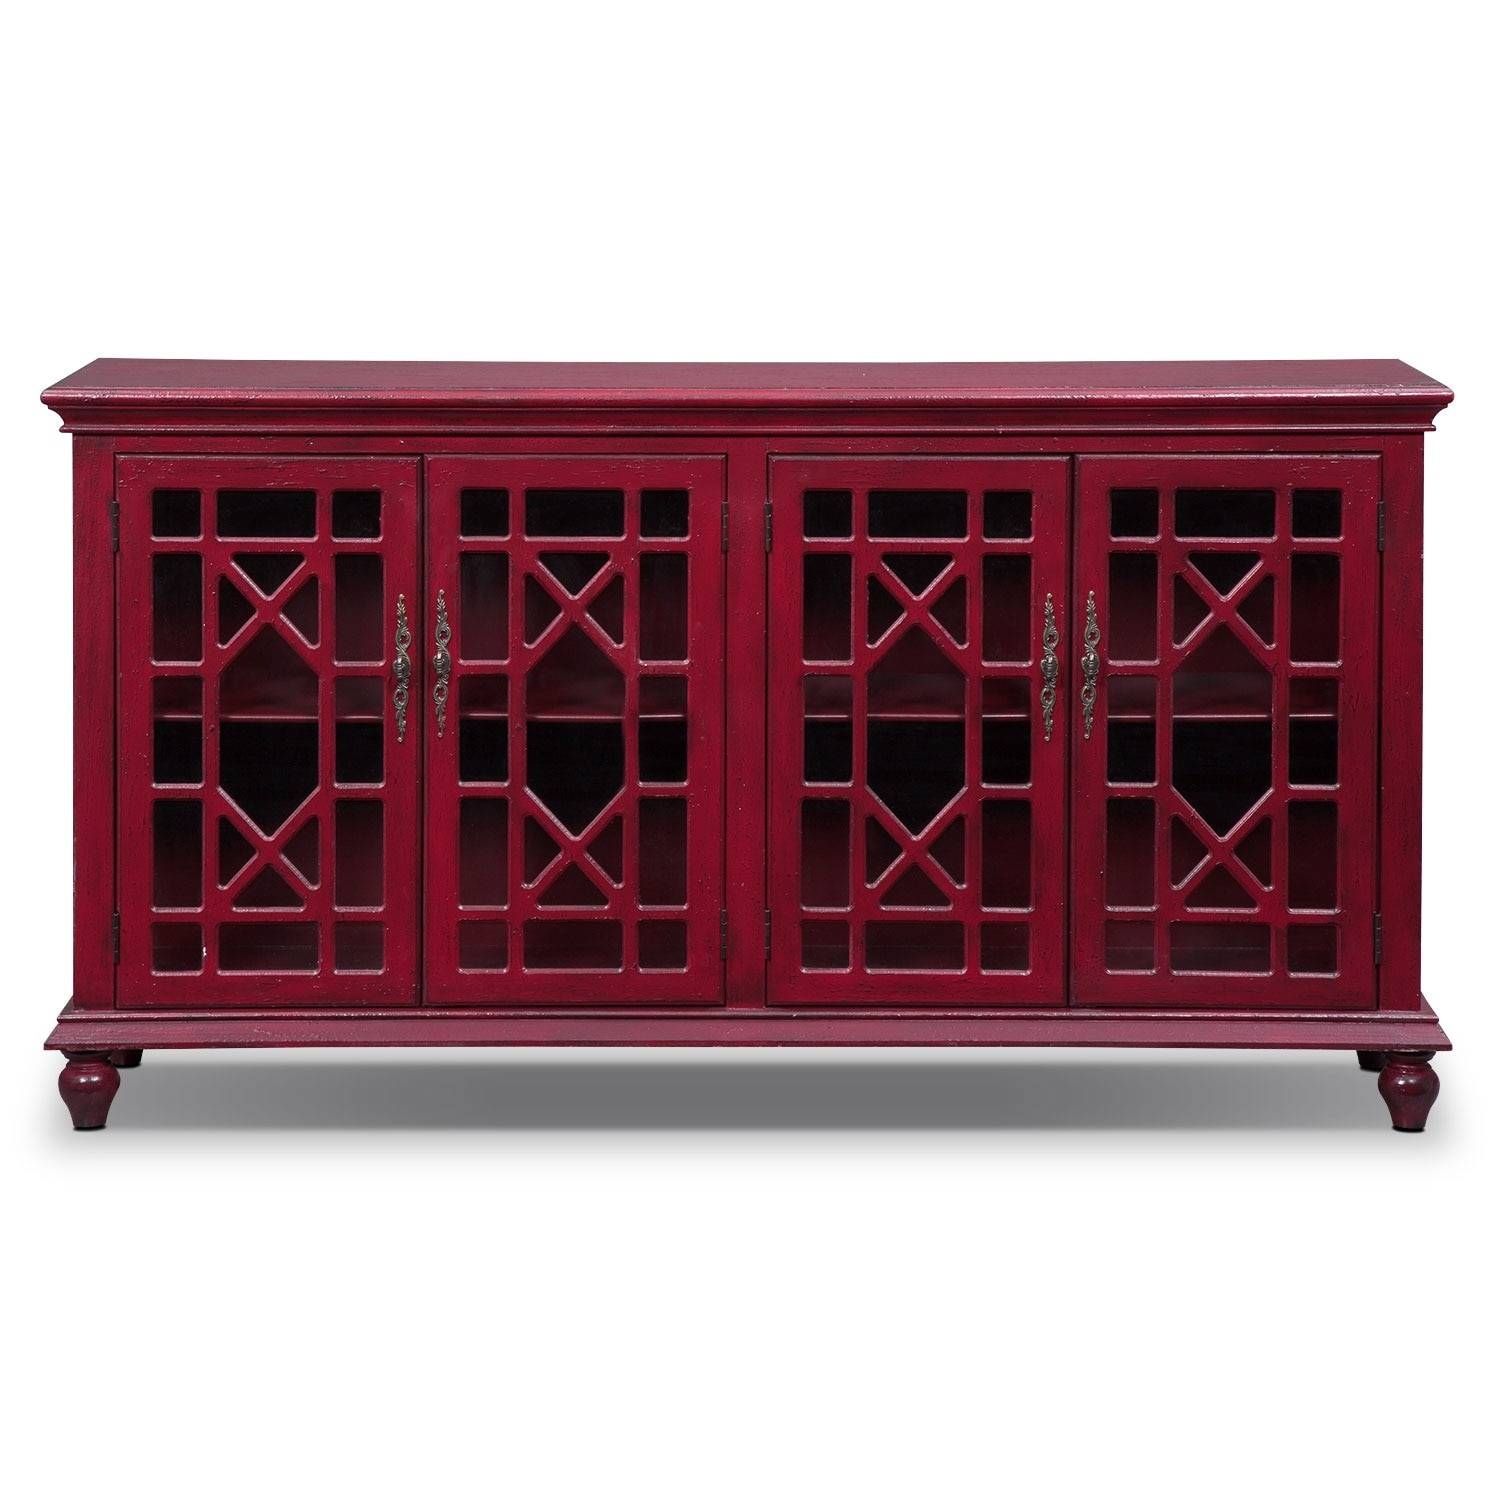 Grenoble Media Credenza – Red | Value City Furniture With Regard To Red Sideboards (View 17 of 20)